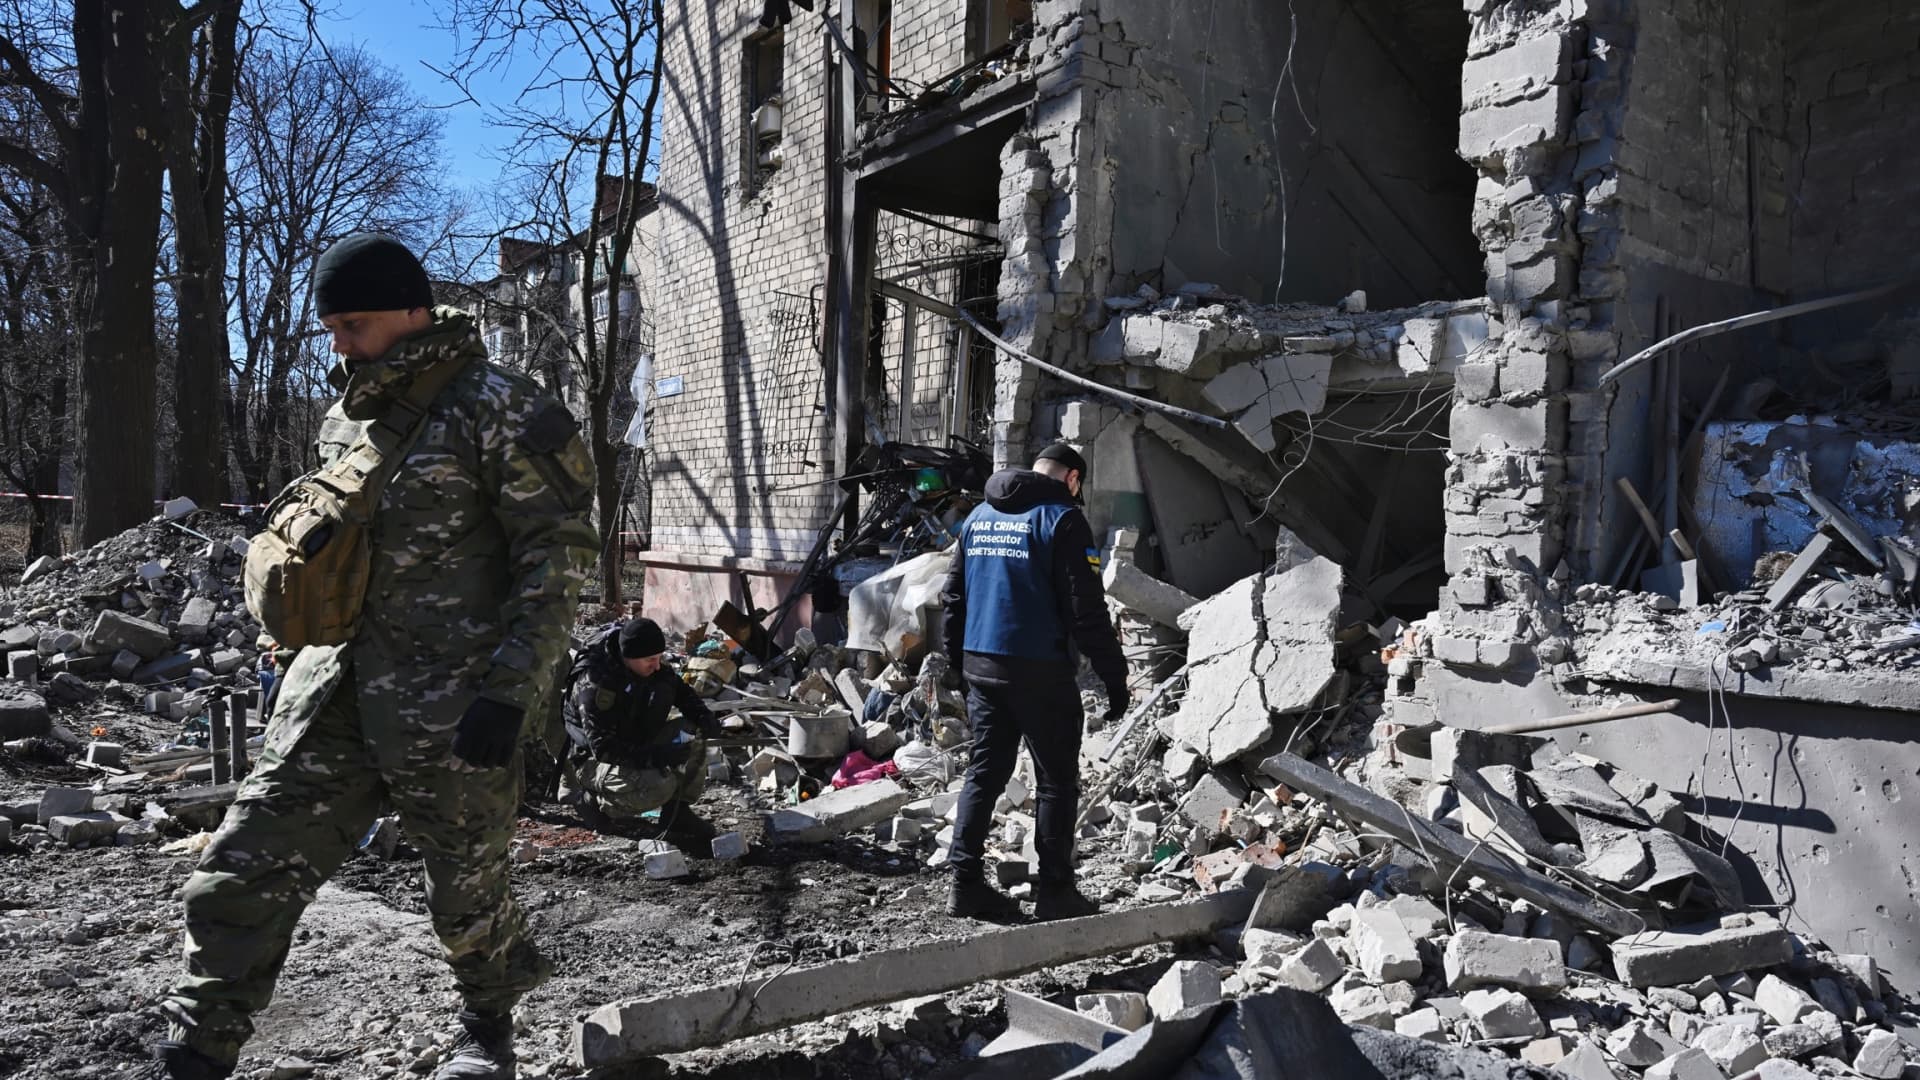 Members of the Ukrainian military inspect a site after a Russian missile attack on the center of Kramatorsk, Ukraine, on March 14, 2023.